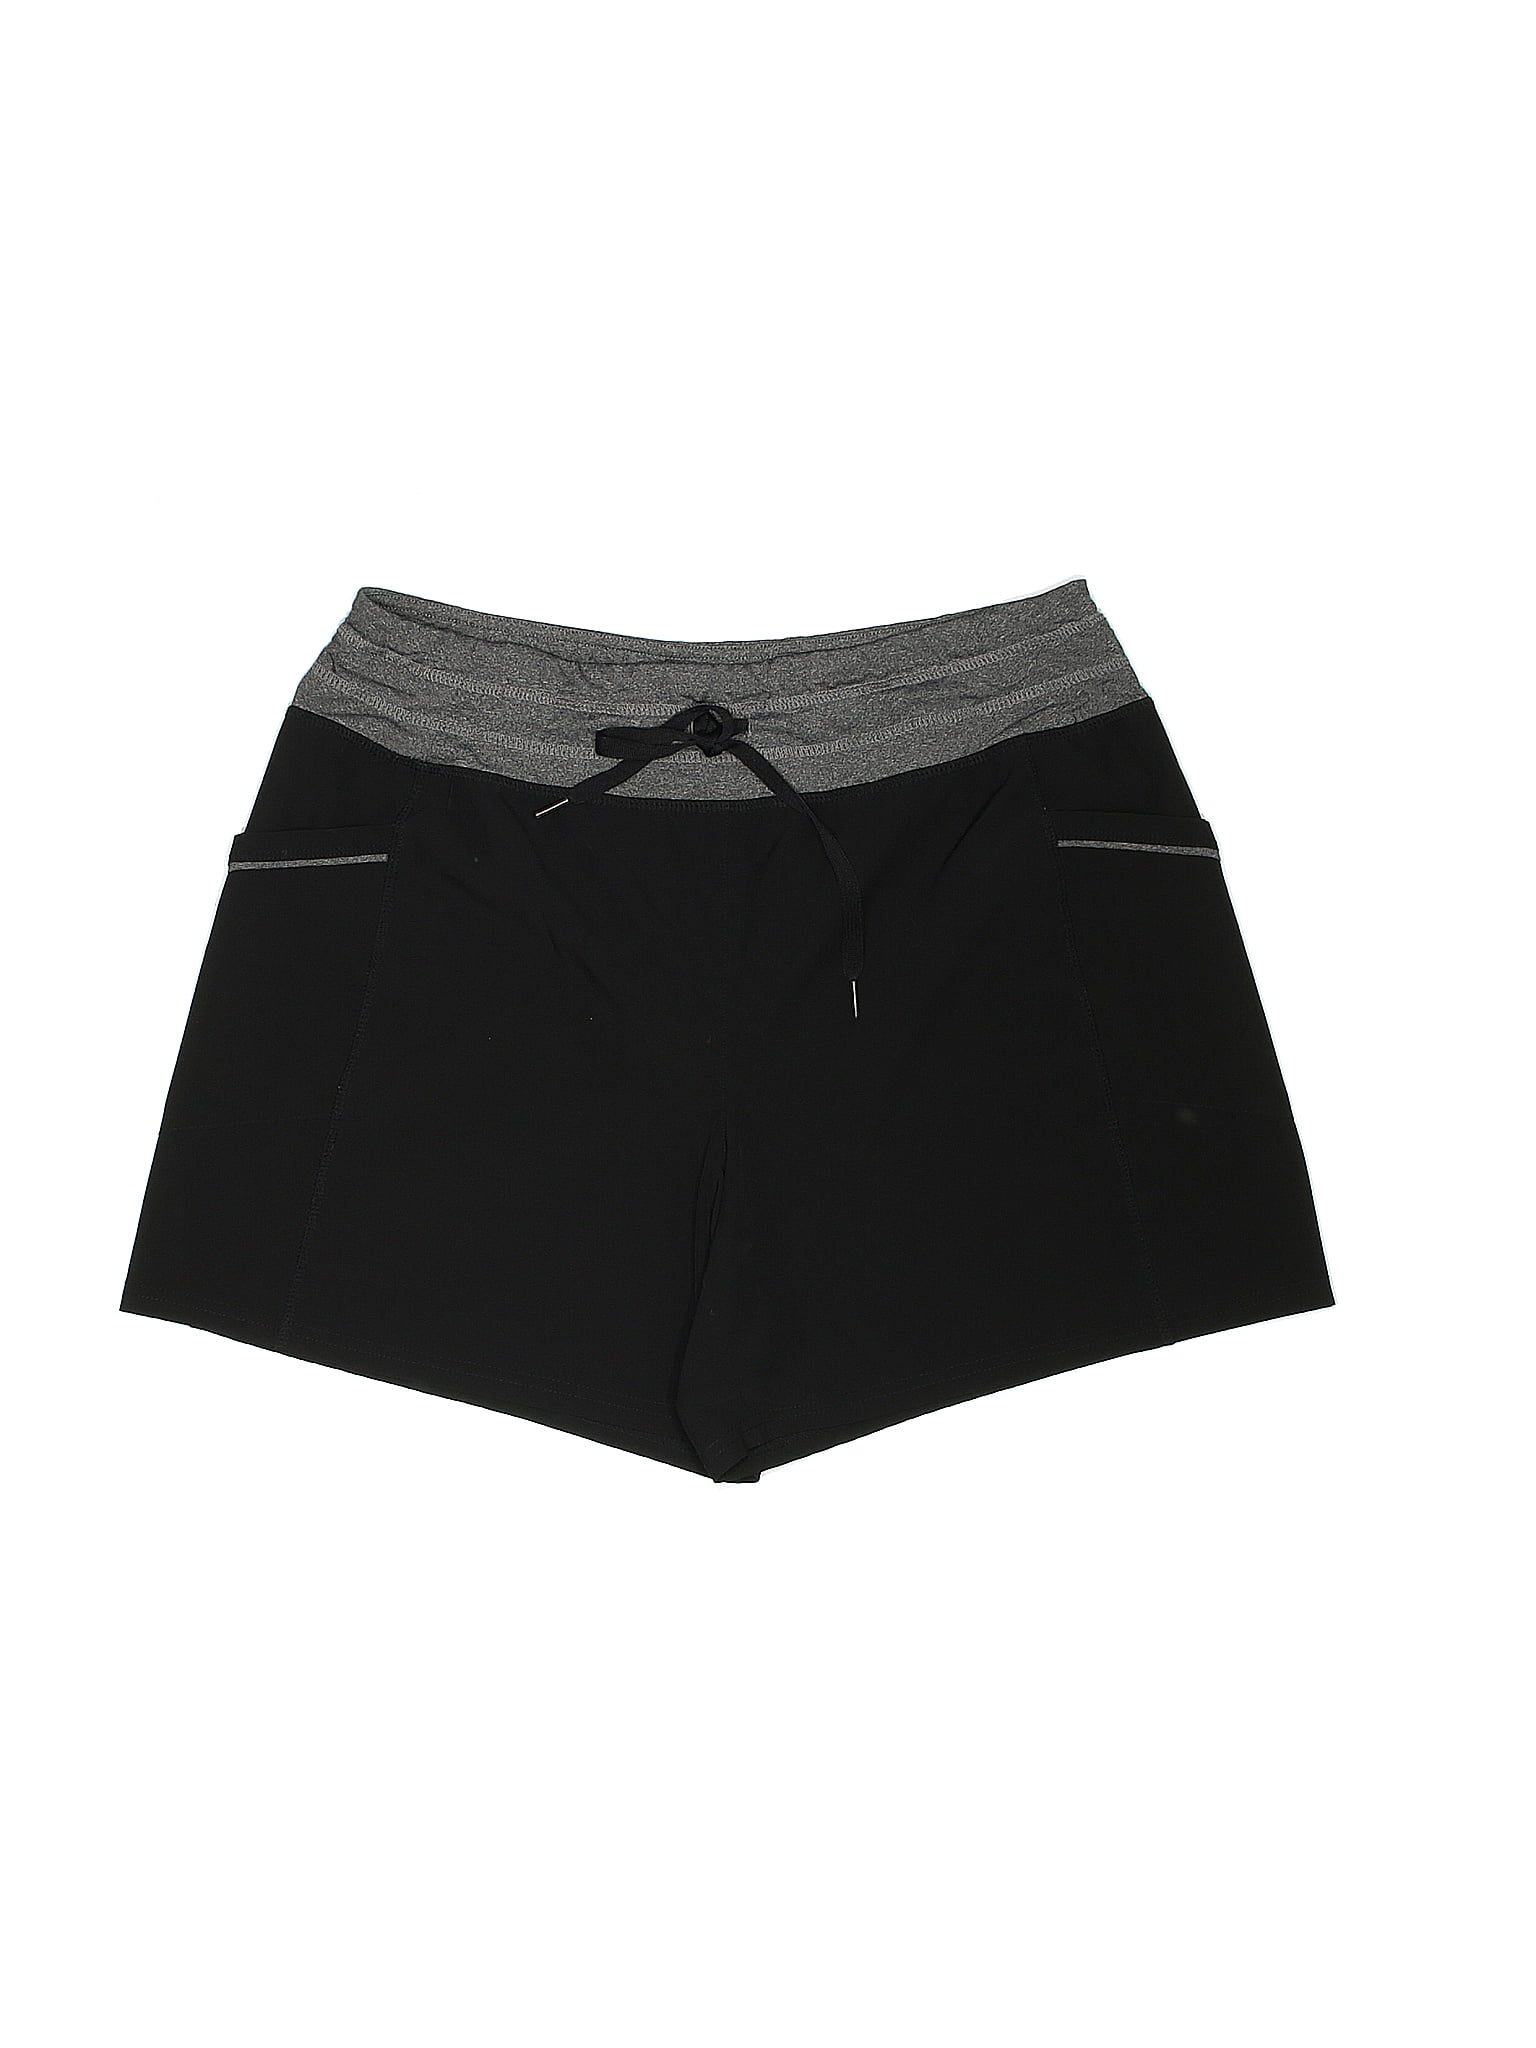 RBX Active 2 in 1 Black Activewear Shorts 3 Inseam Womens Size Large MSRP  $48